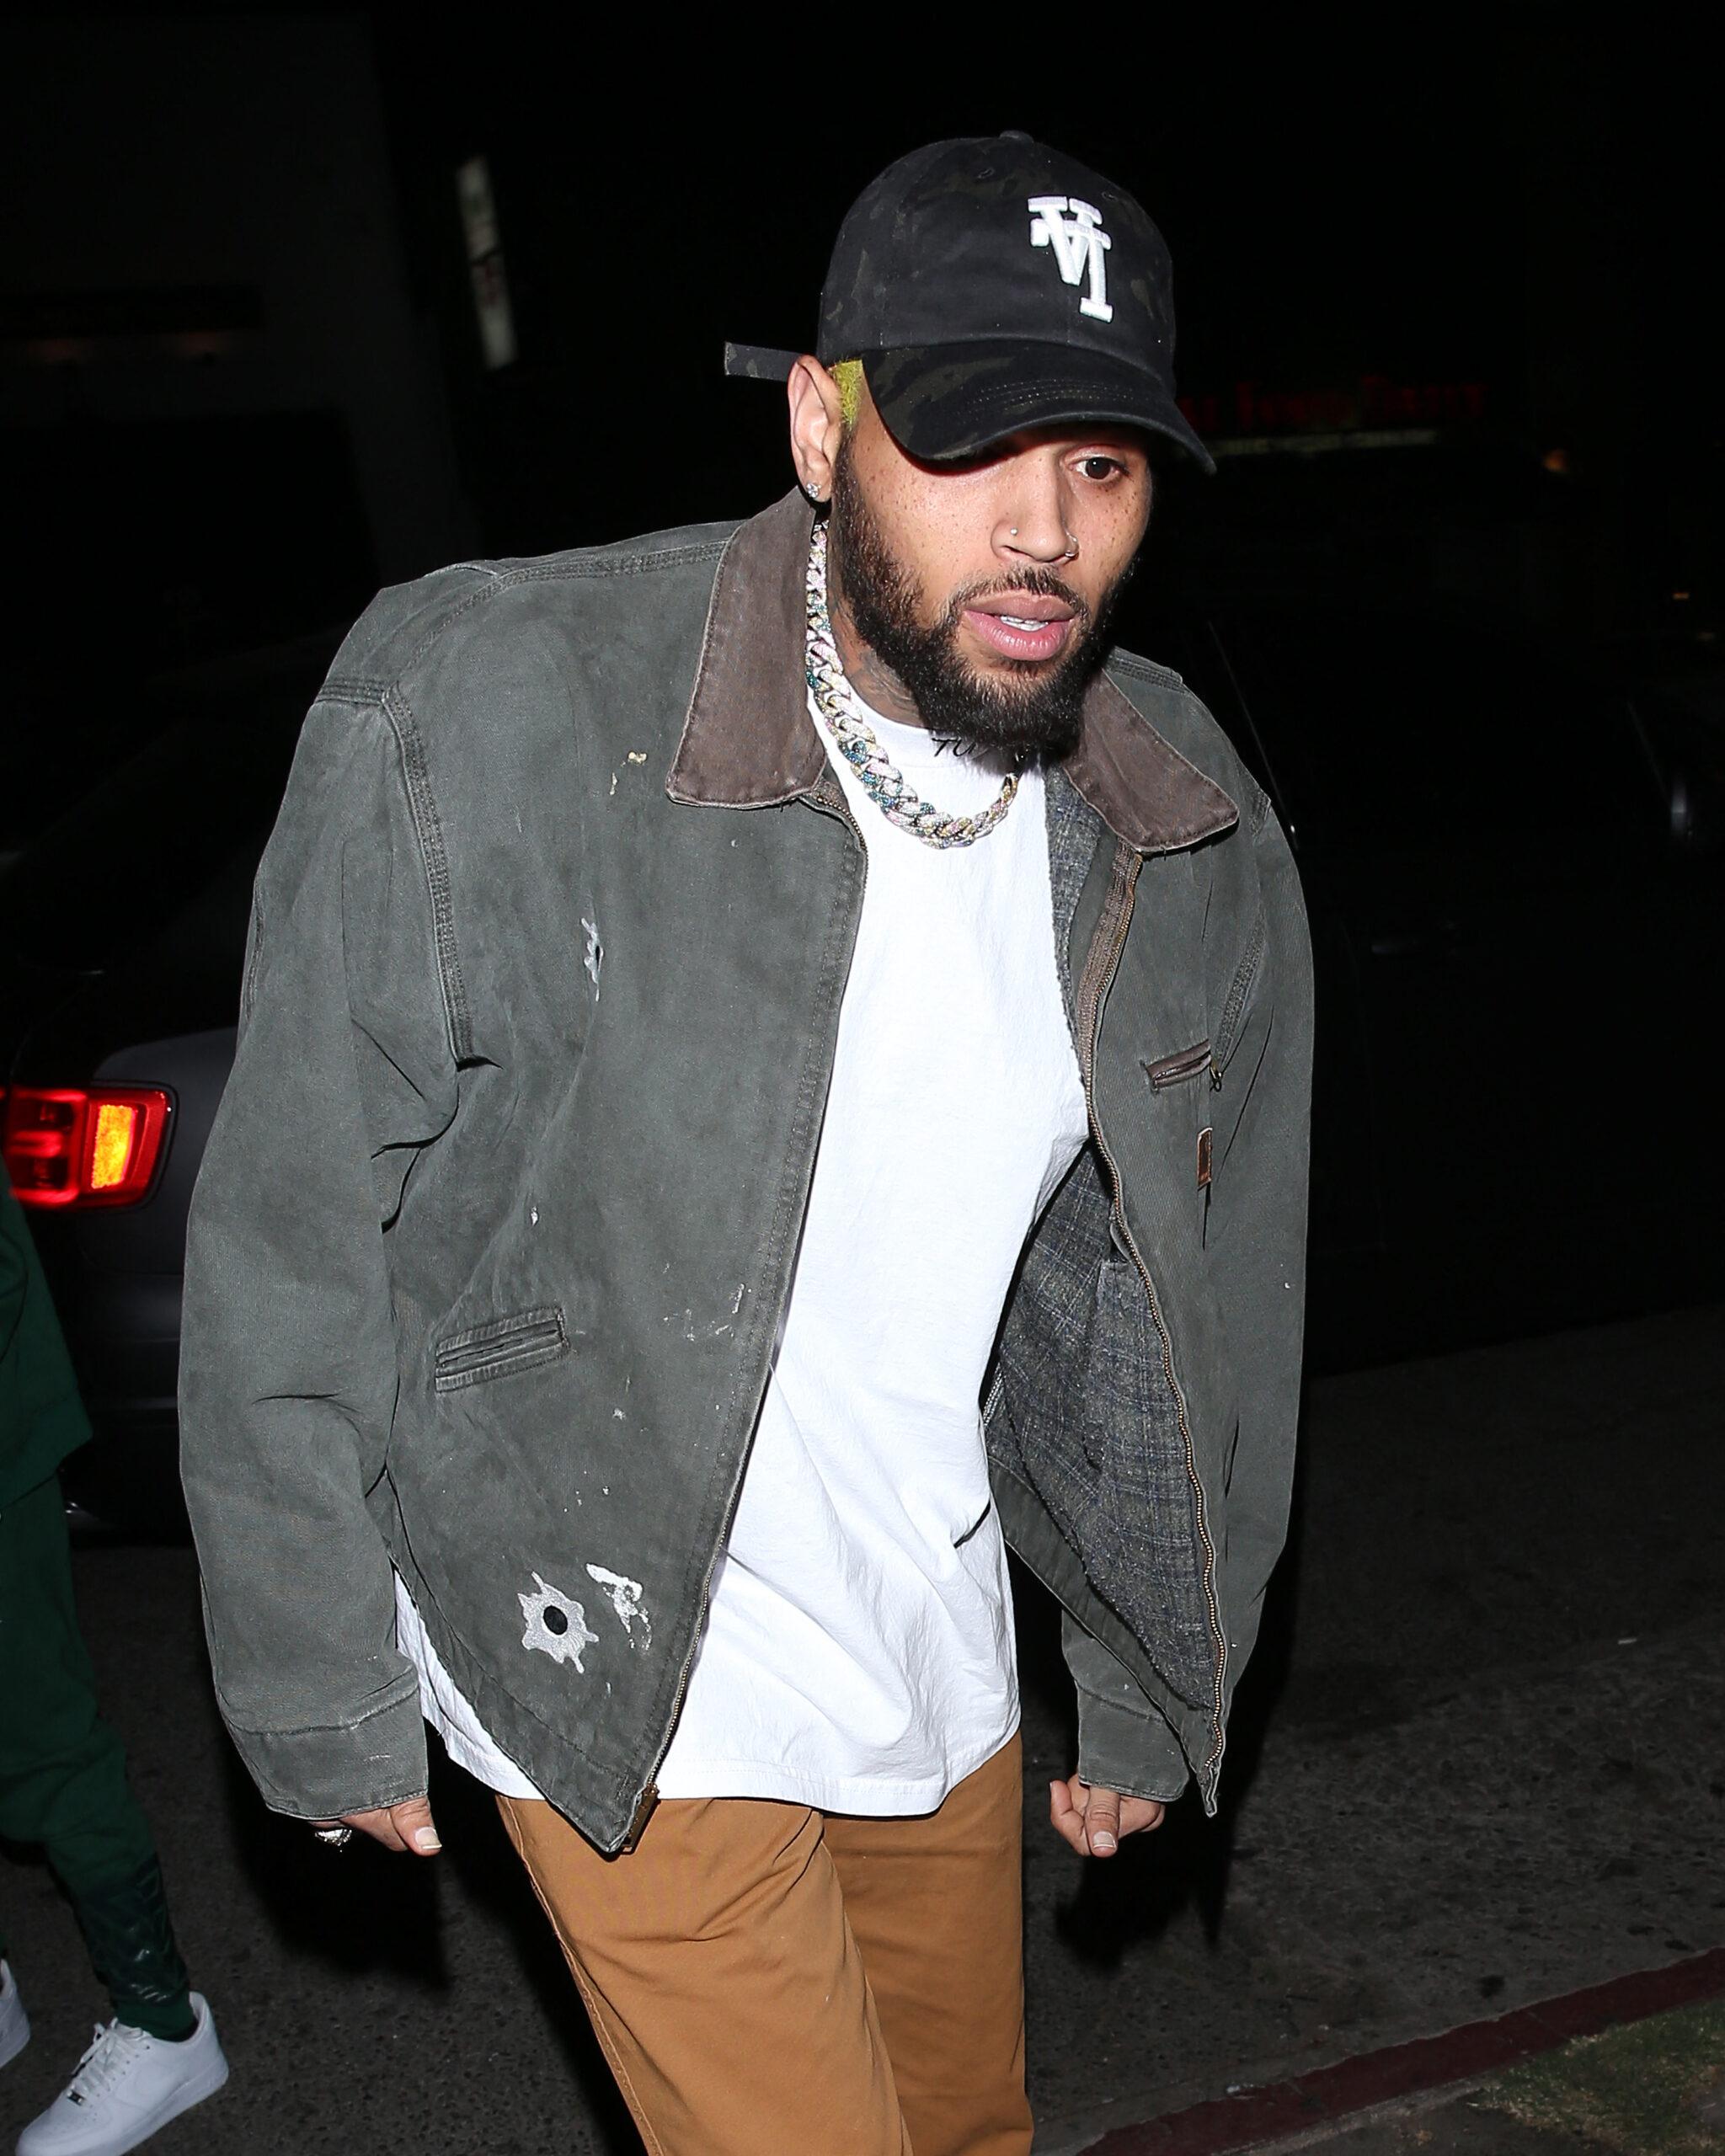 Chris Brown was seen at 'The Nice Guy' bar in West Hollywood, CA